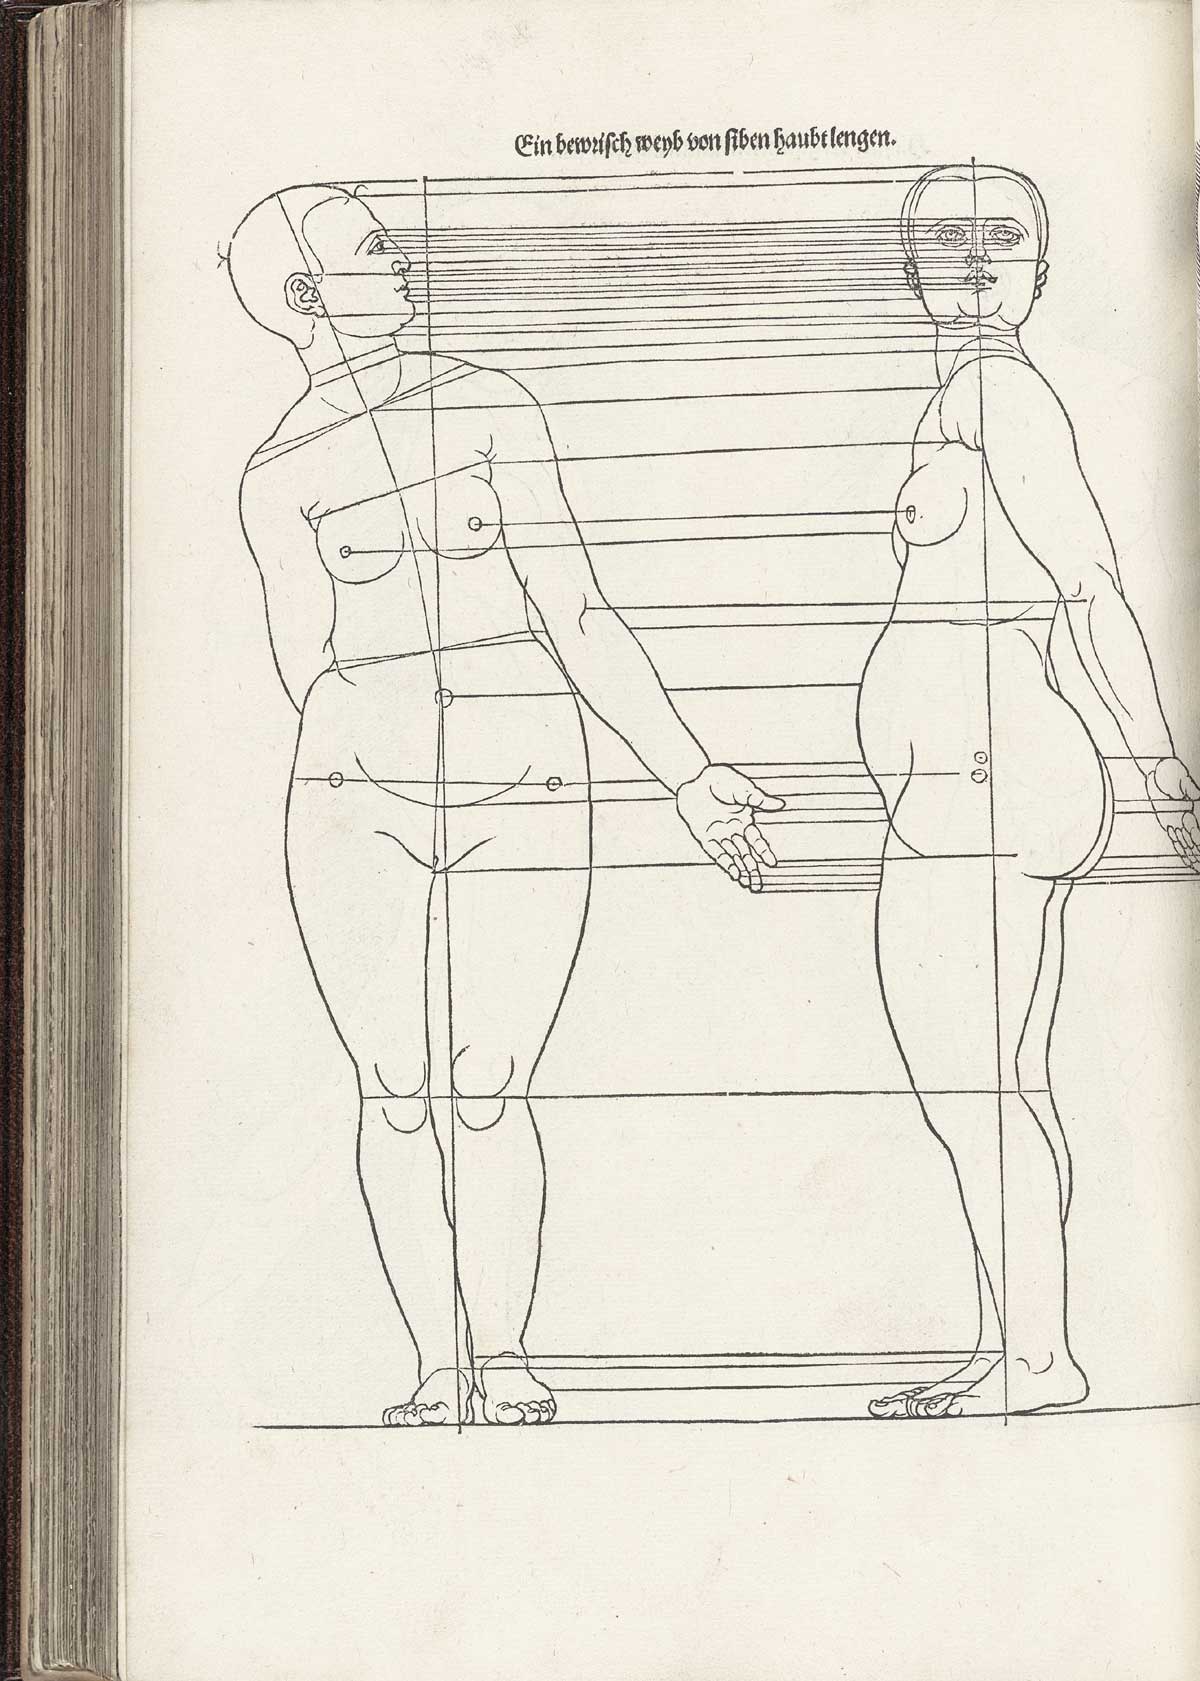 Woodcut image of two standing nude female figures bending to the left side at the waist and looking to the right, the one on the left facing the viewer and the one on the right in profile facing to the right, both with horizontal lines cutting across the figures showing proportions, for instance from the bottom of the chin to the top of the shoulder.